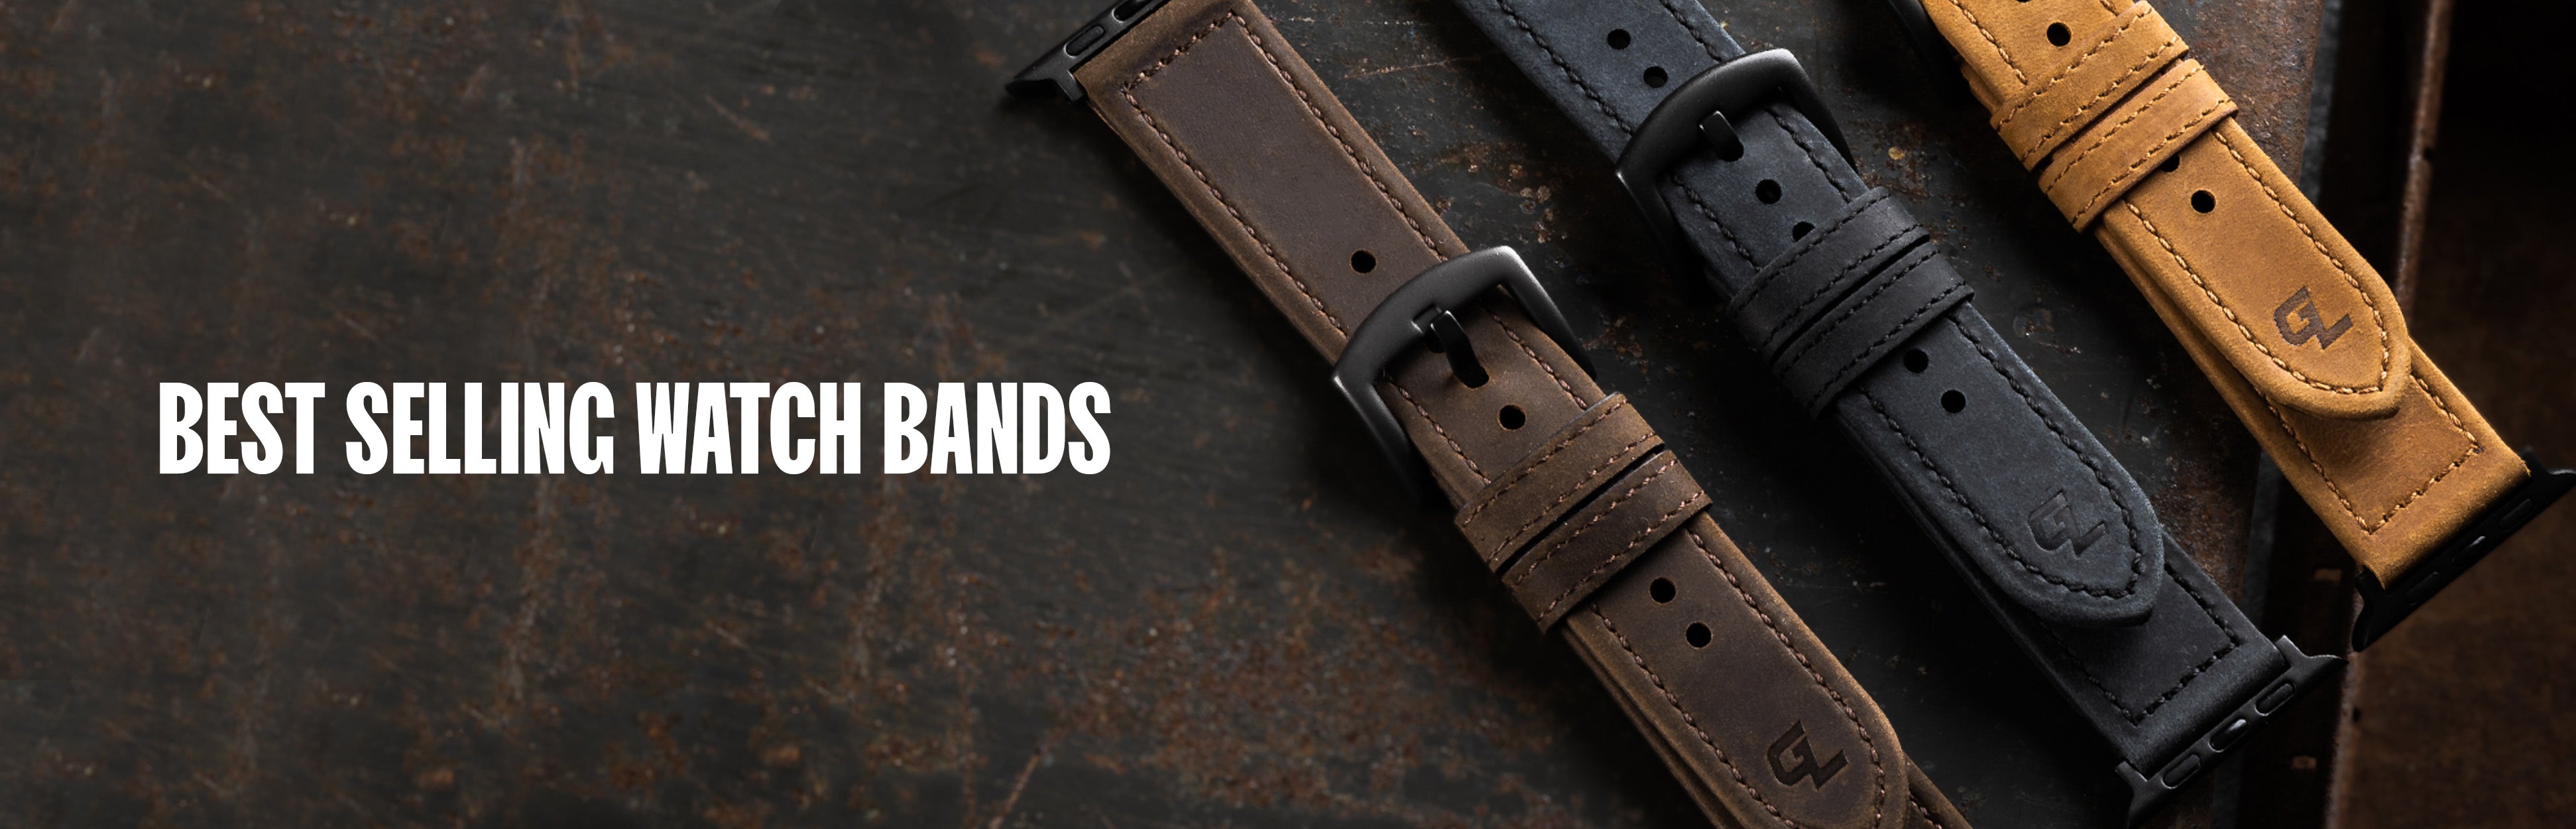 Groove Life Best Selling Watch Bands 